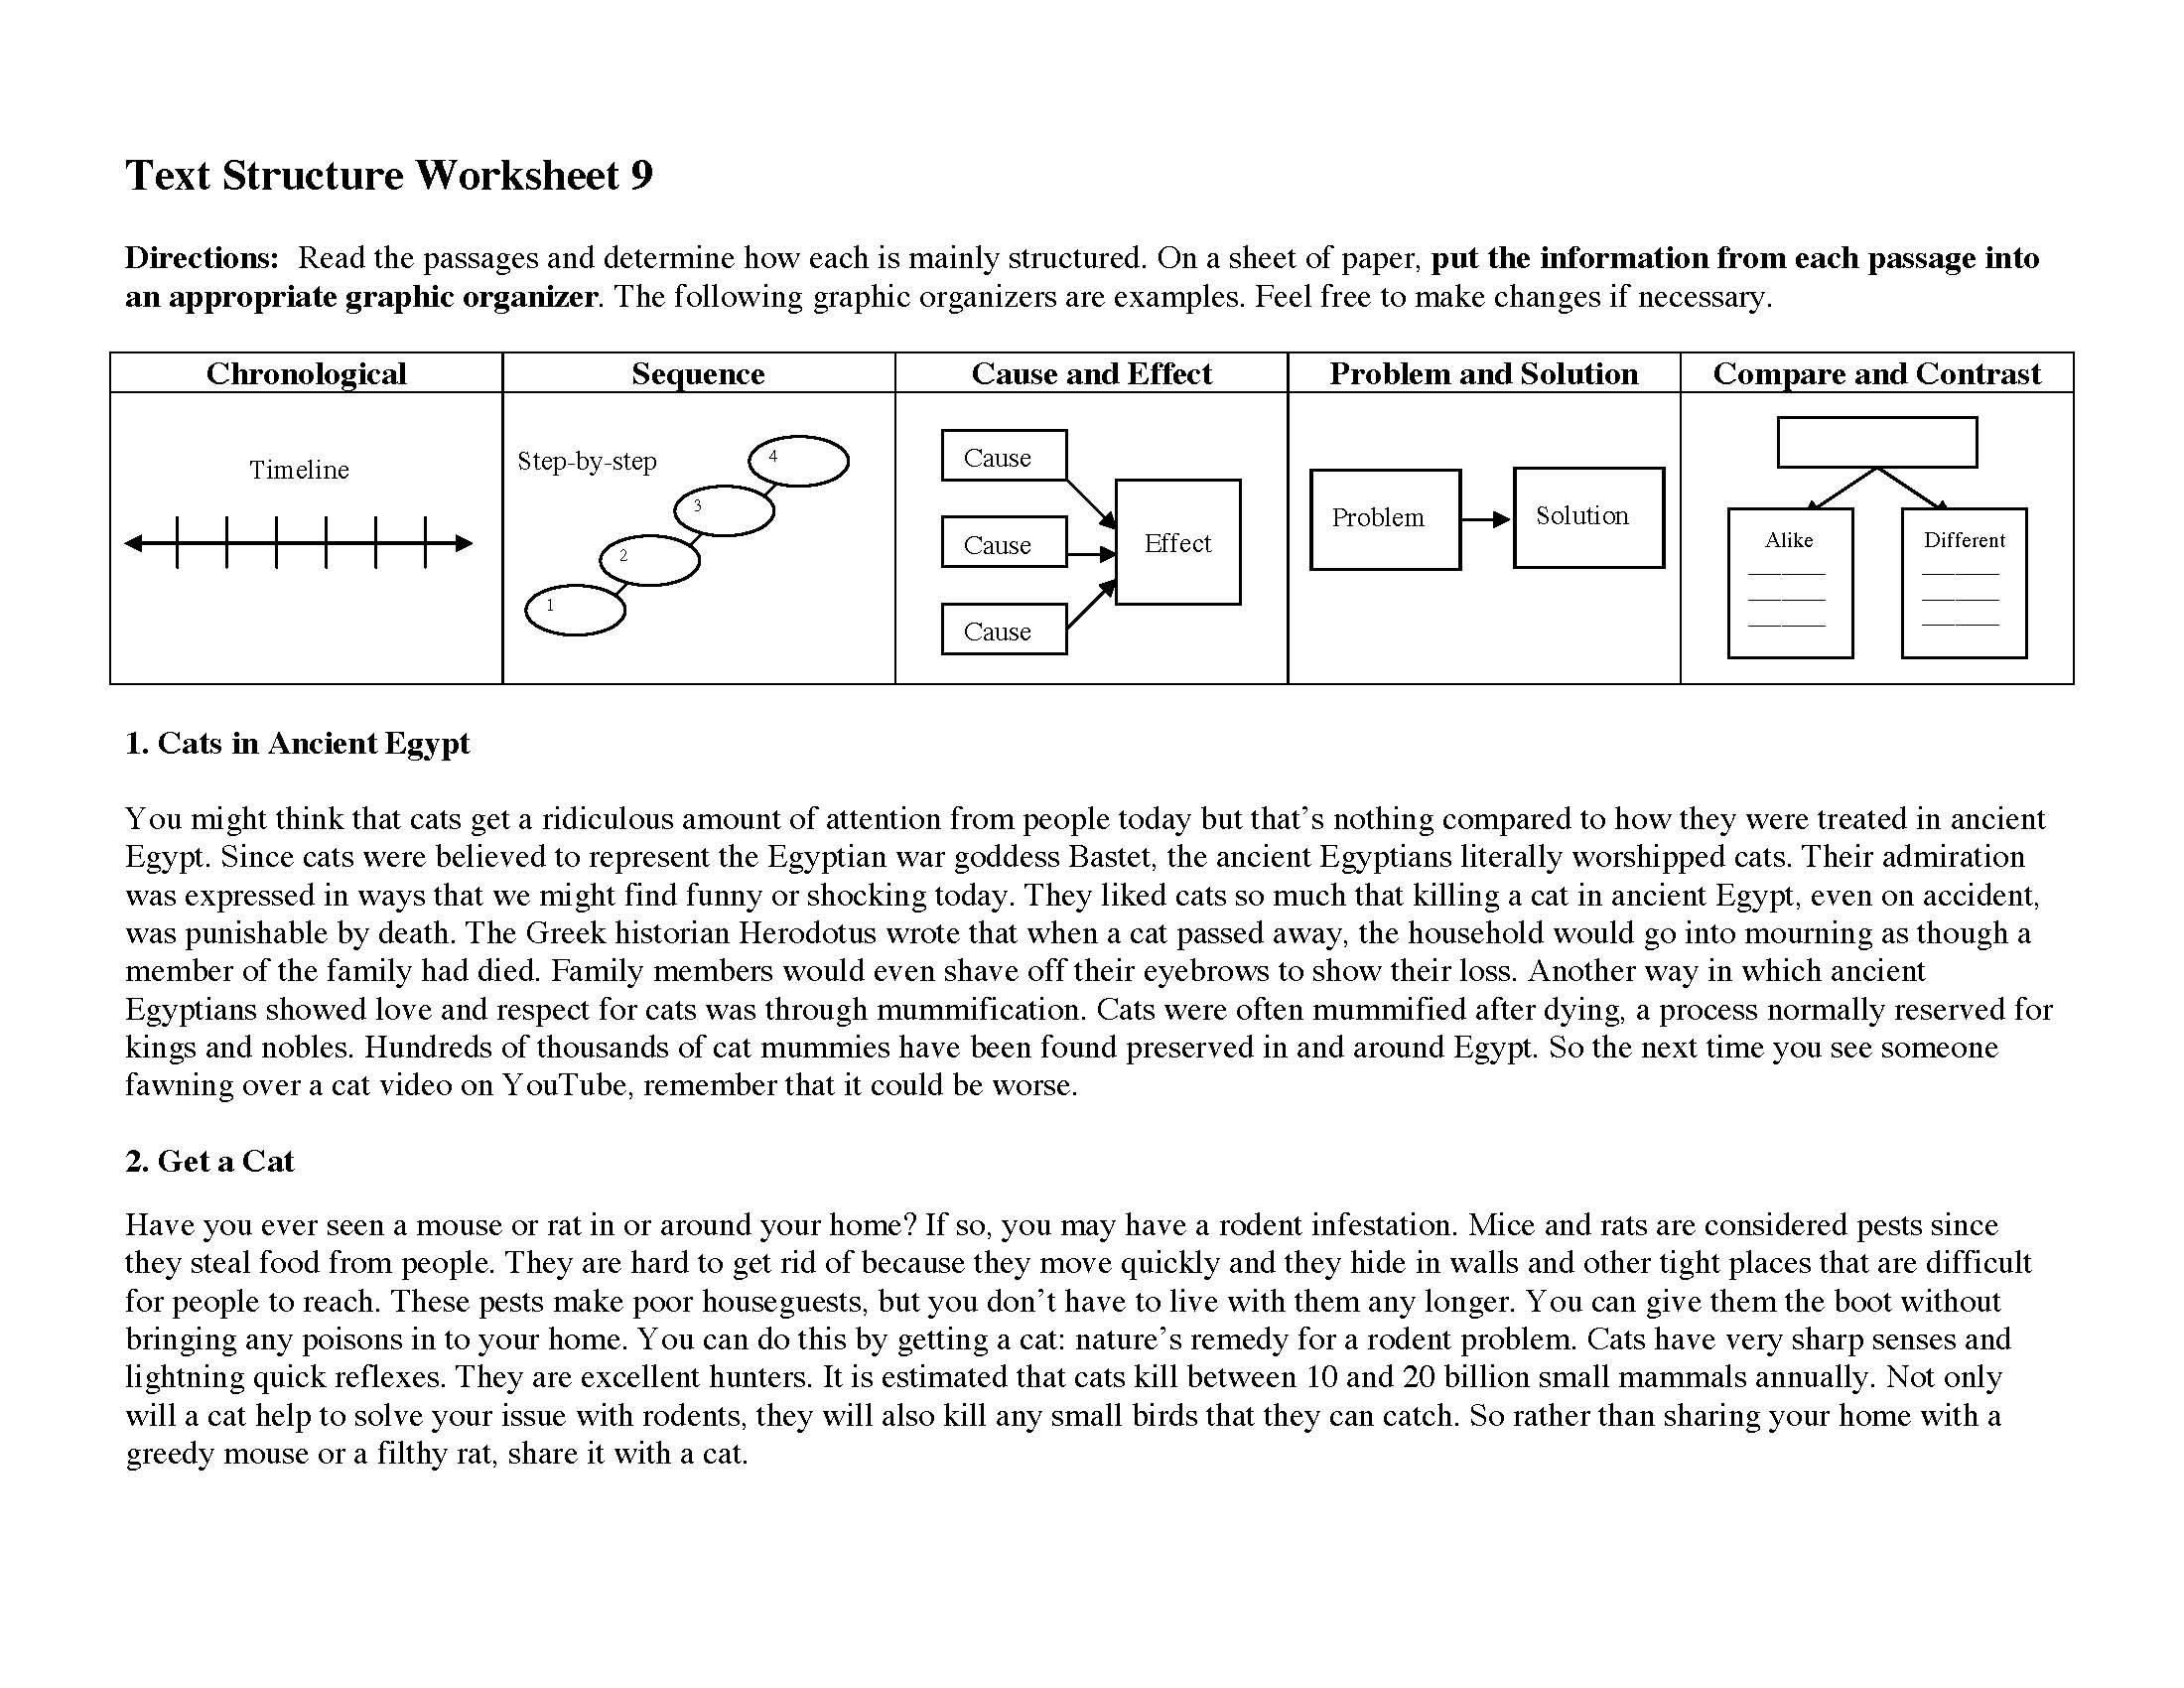 This is a preview image of Text Structure Worksheet 9. Click on it to enlarge it or view the source file.